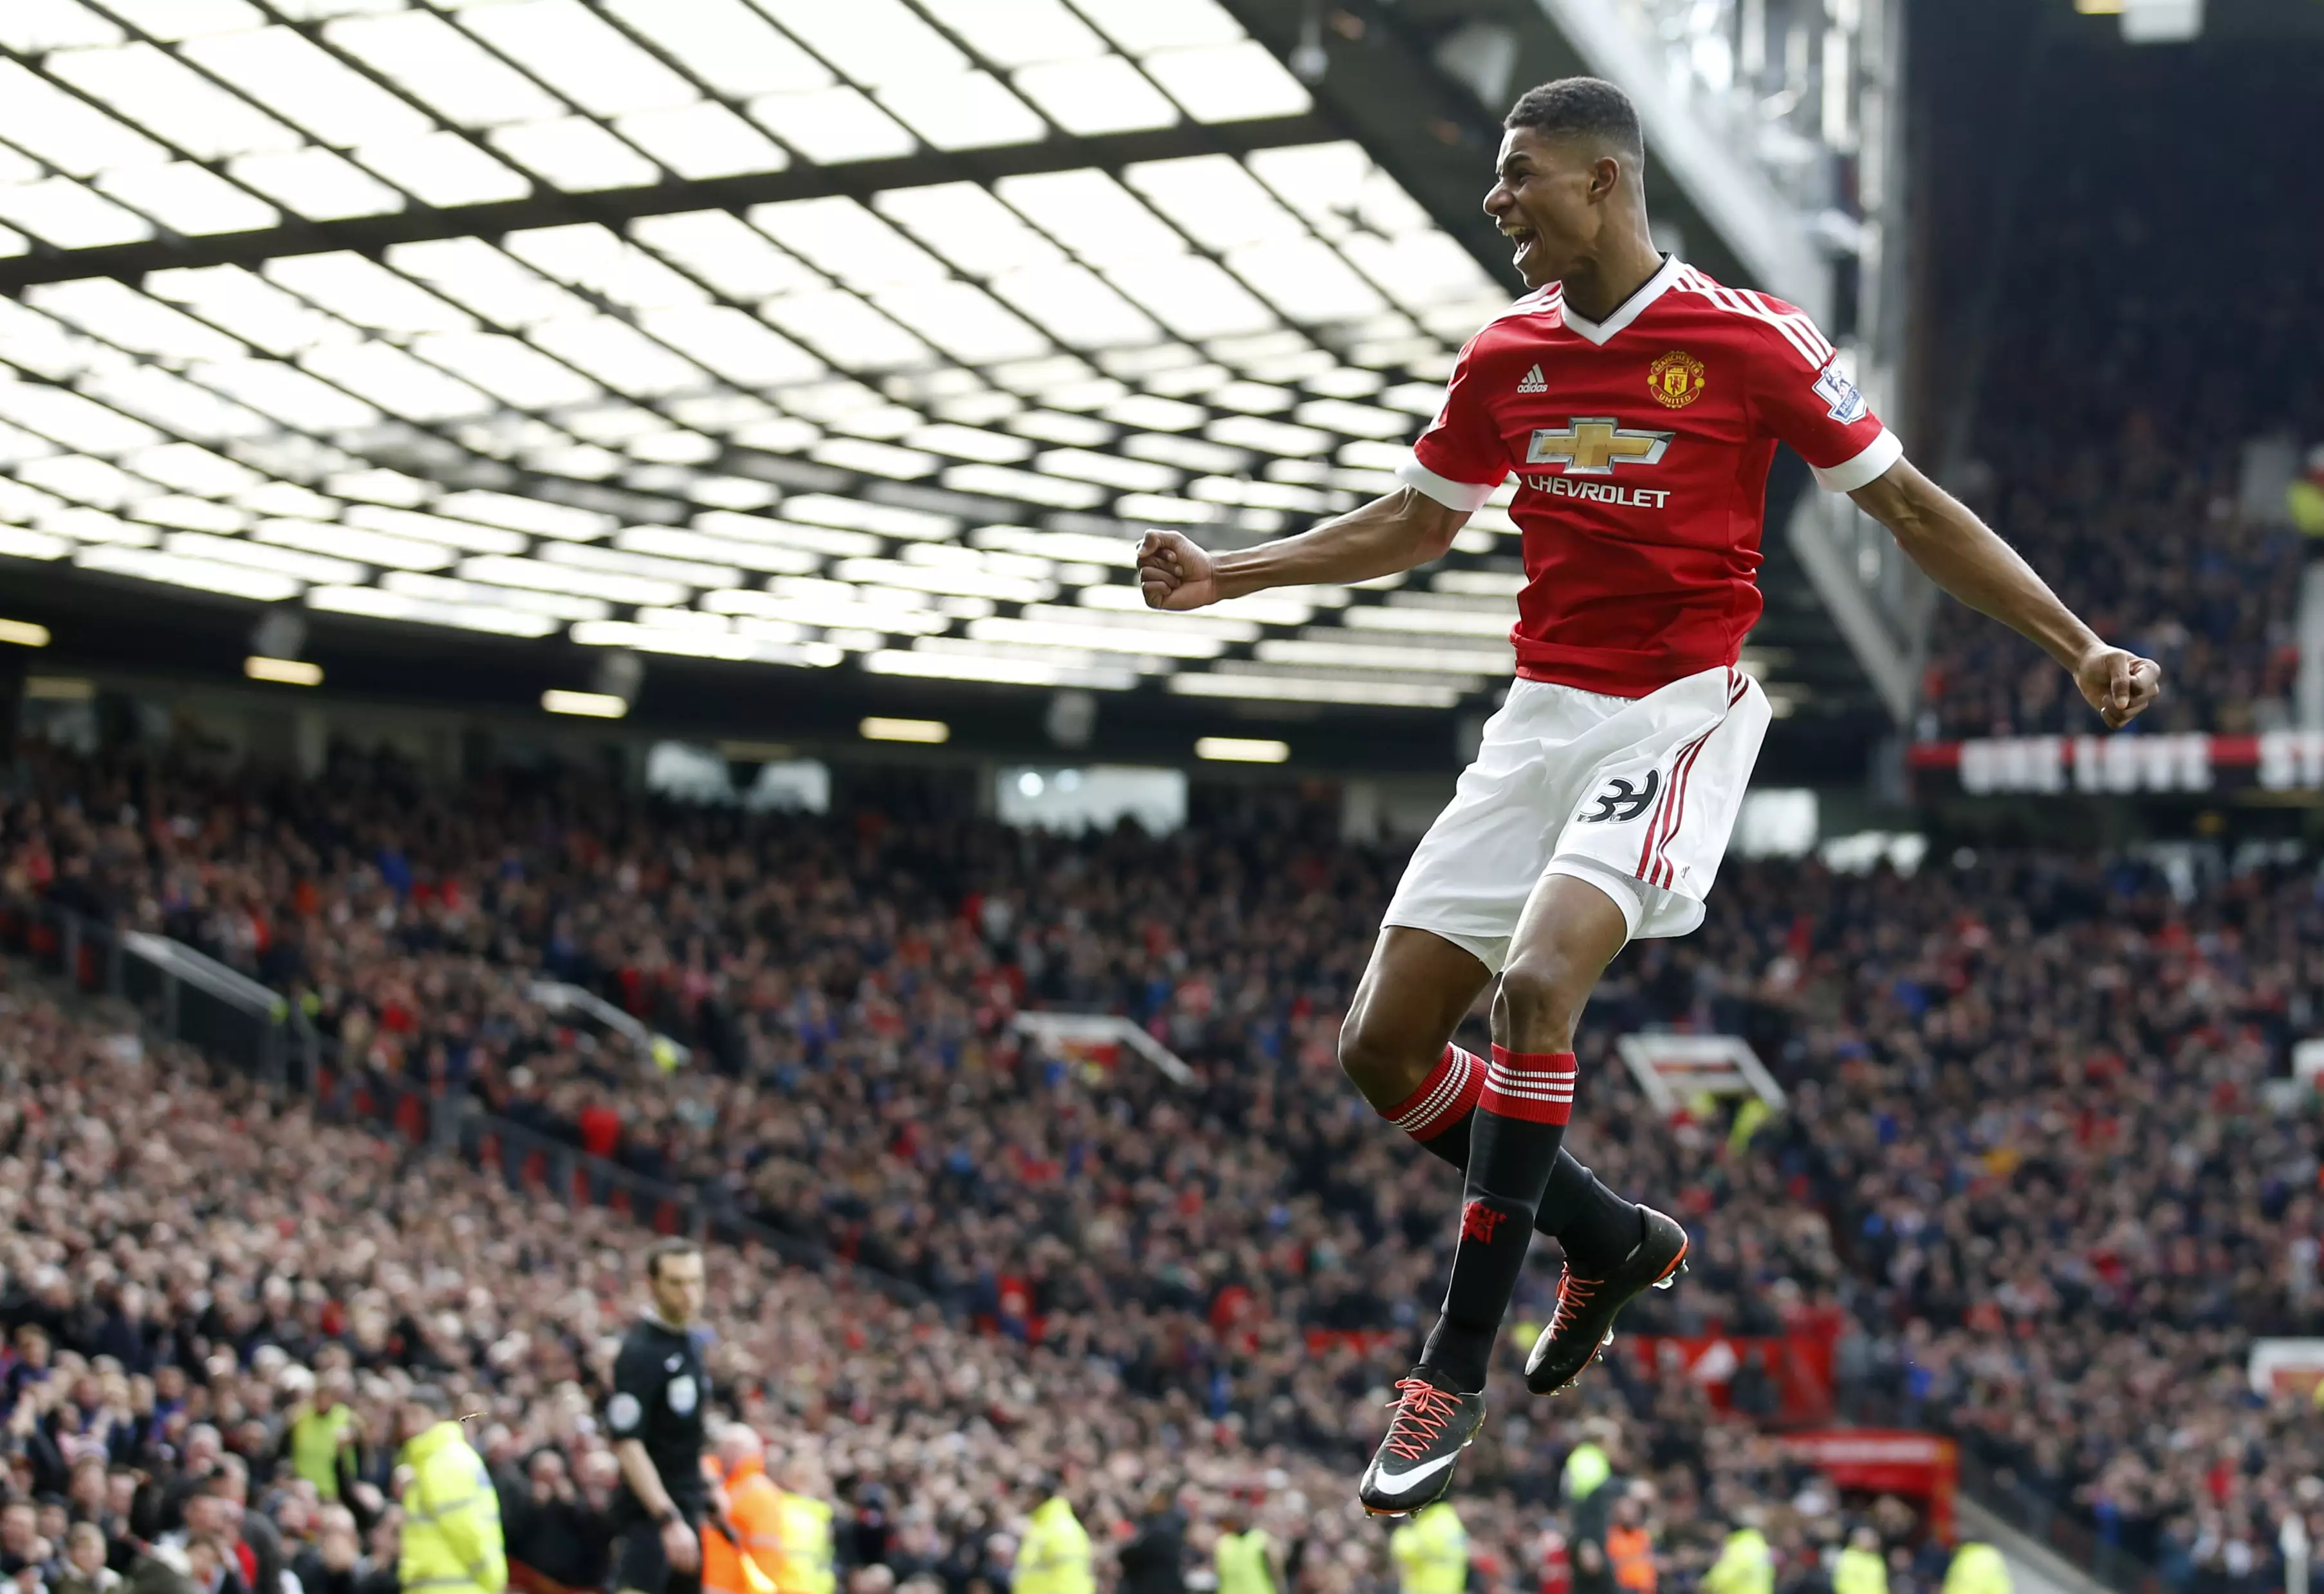 Rashford's career won't really take off until his return to Old Trafford. Image: PA Images